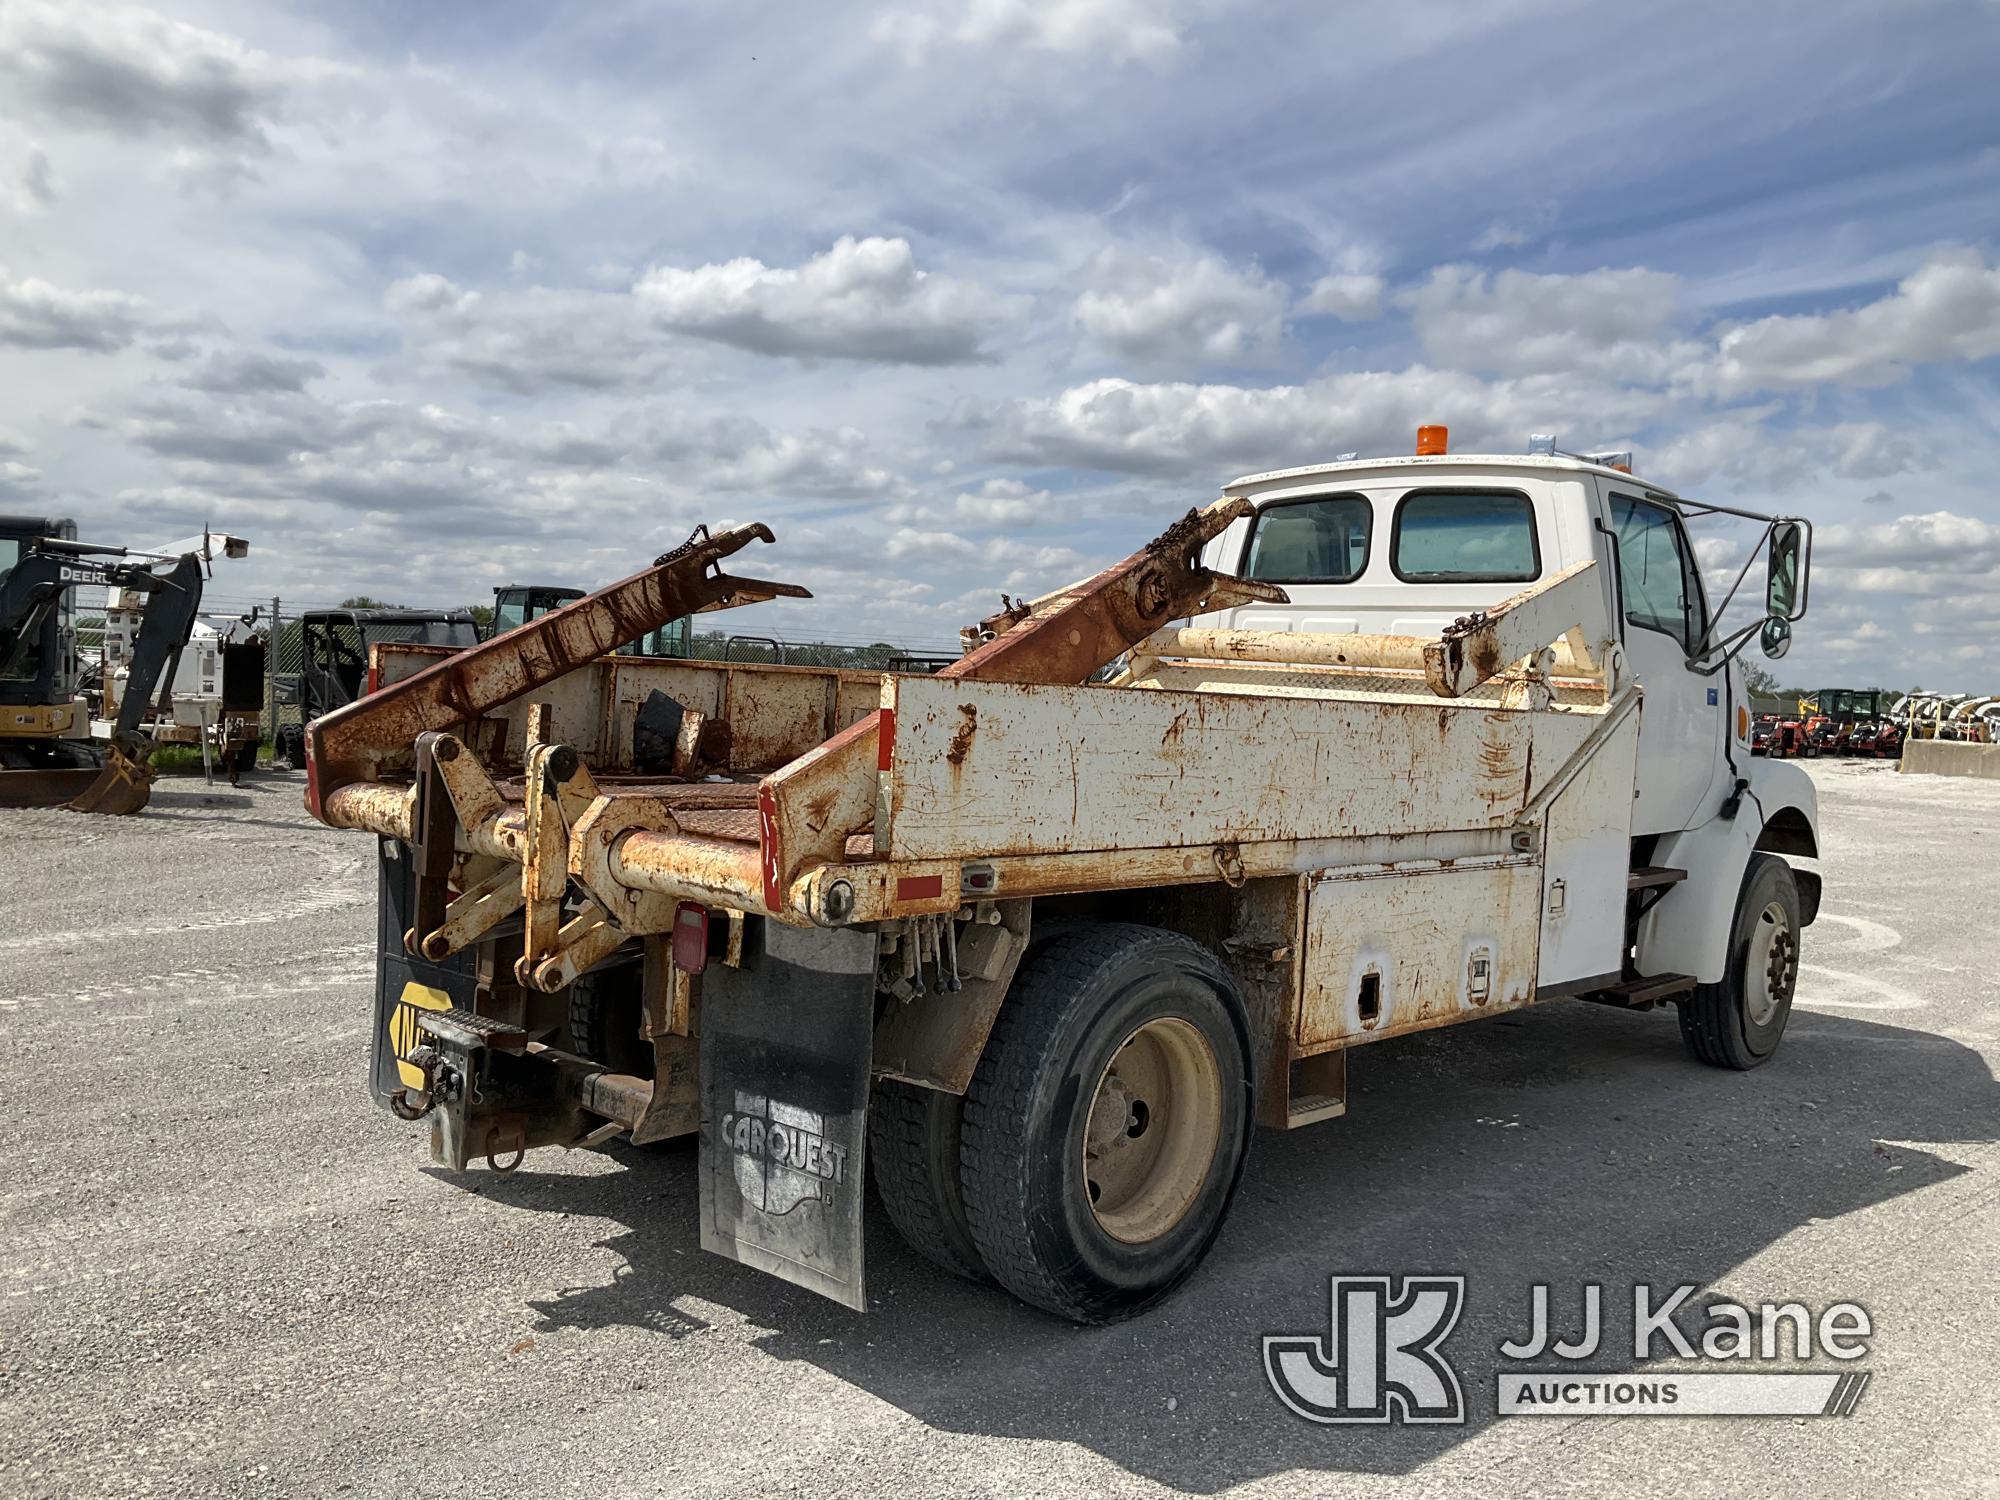 (Hawk Point, MO) 2000 Sterling L7500 Reel Loader Truck Runs, Moves & Operates) (Rust and Paint Damag